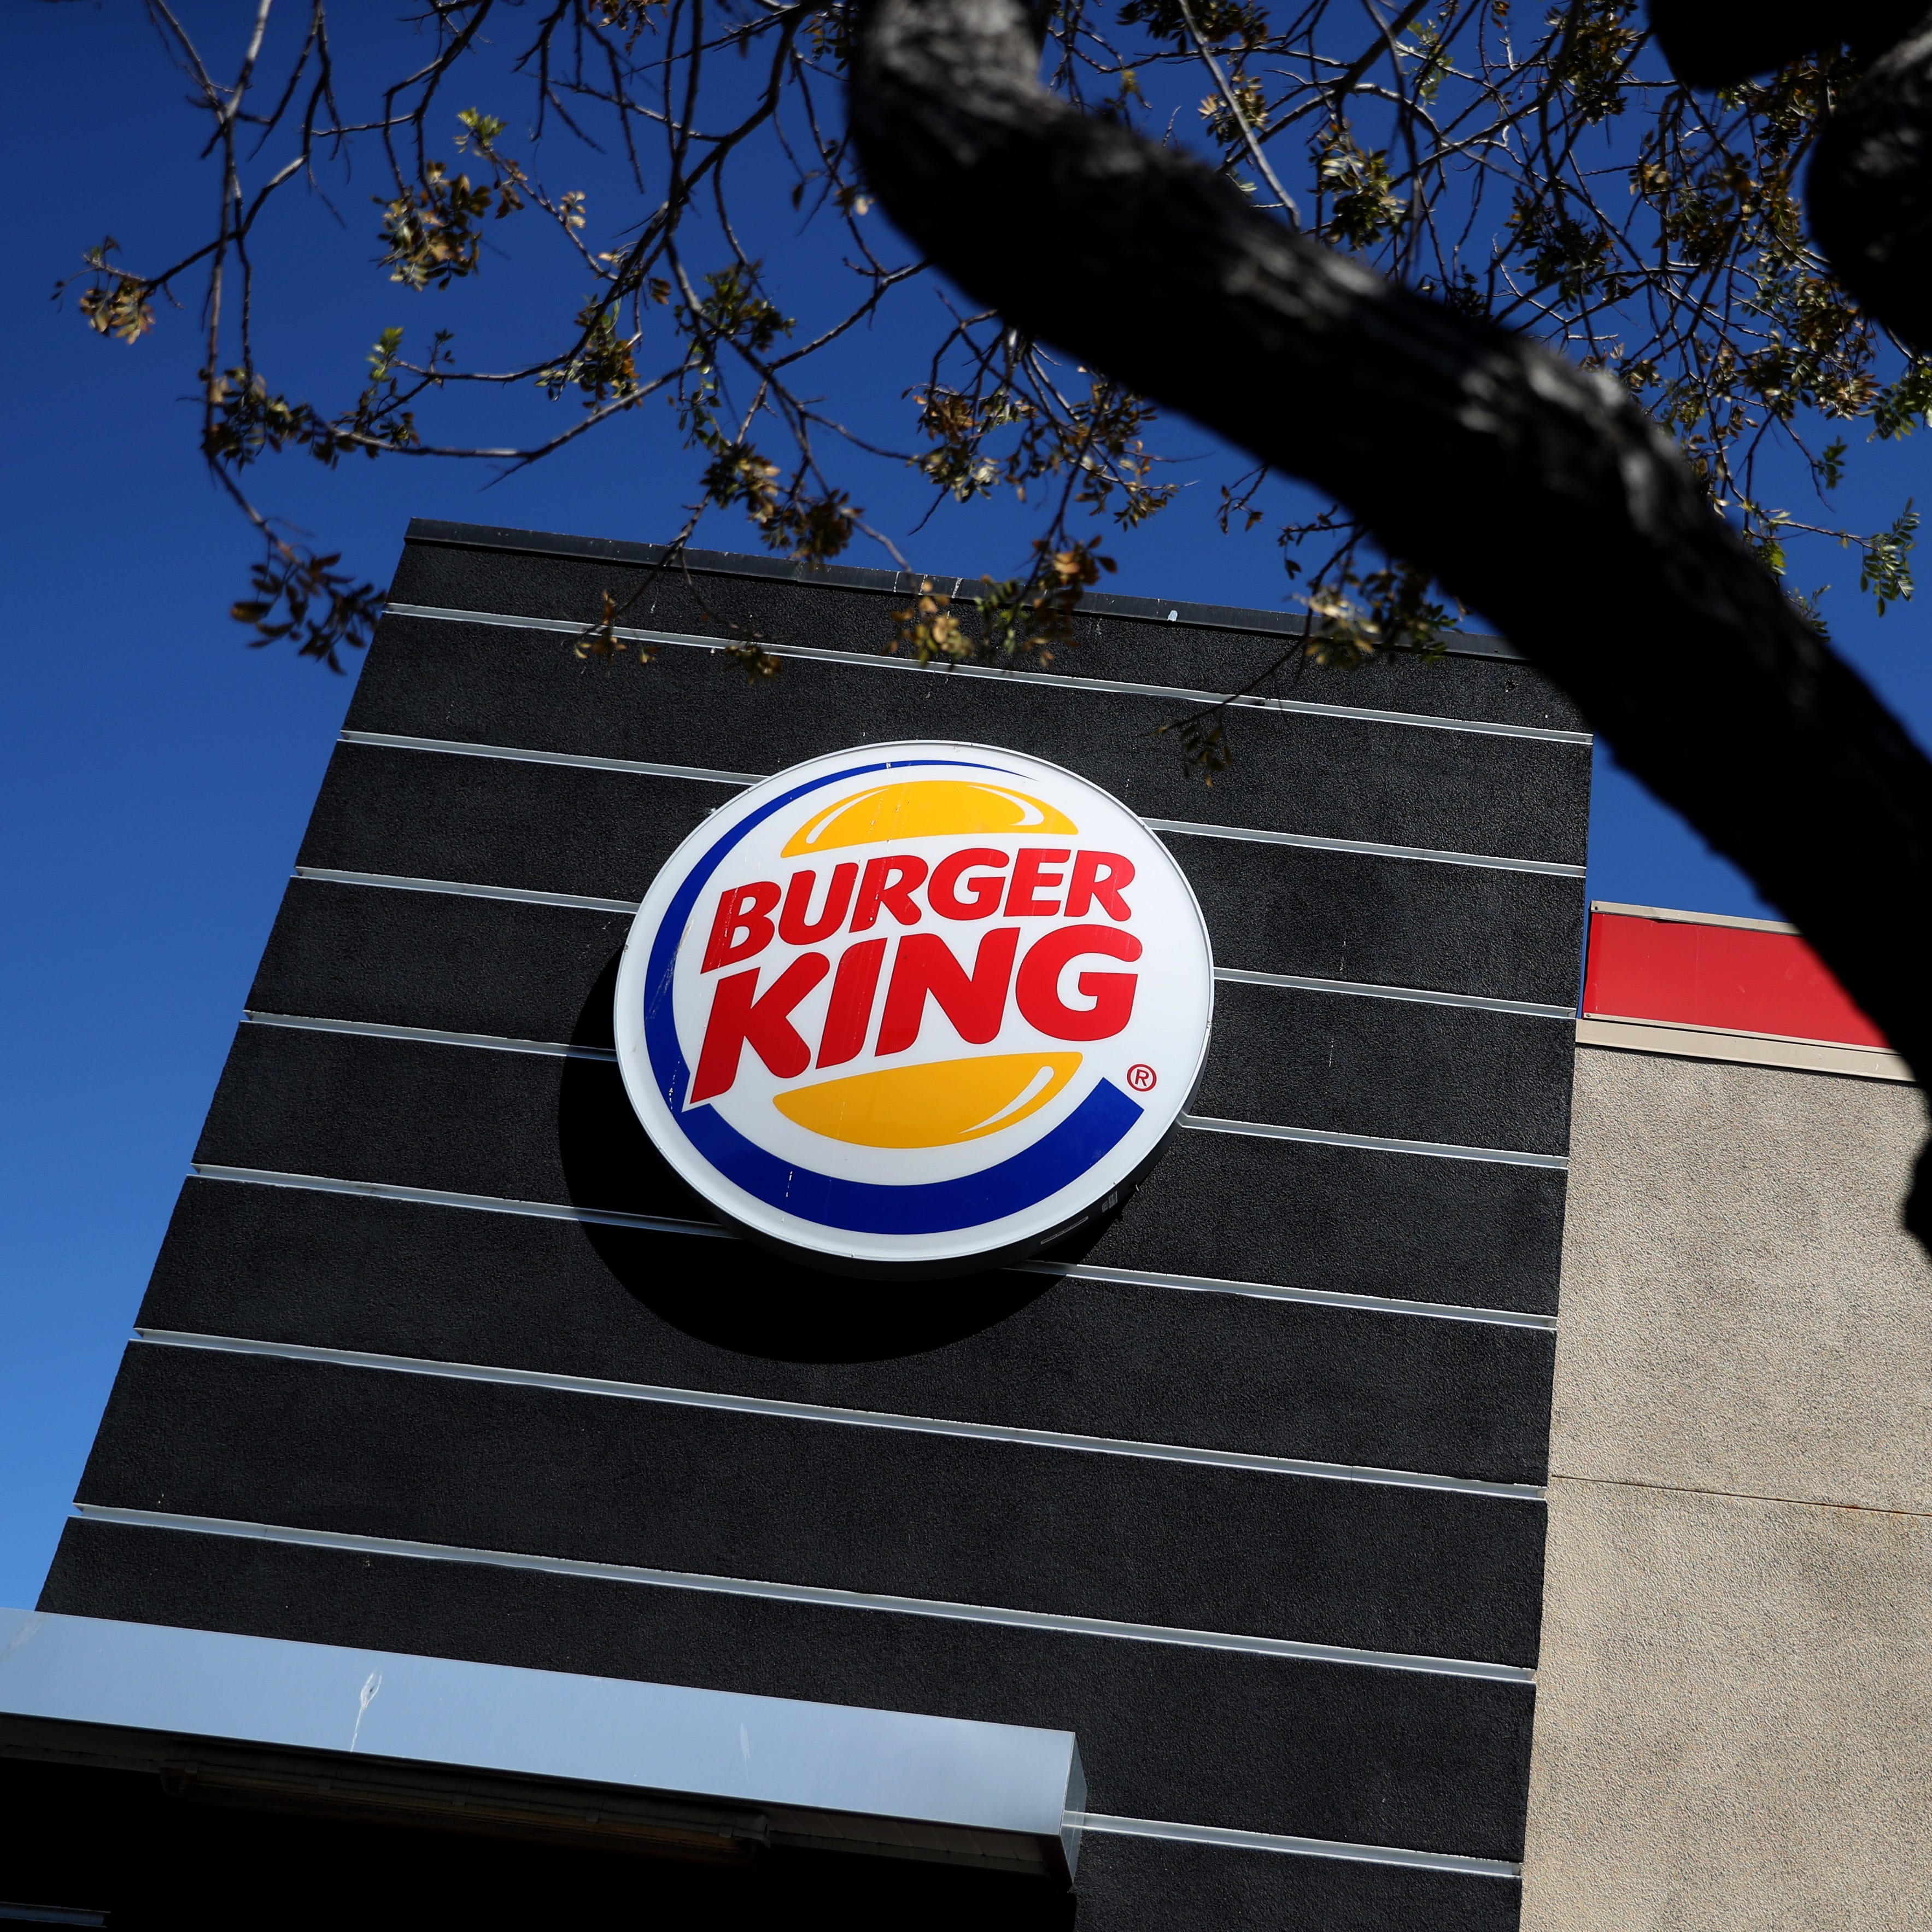 Burger King: Members of Burger King's loyalty service, 'Royal Perks', can get a side of cryptocurrency with their order of $5 or more. Online or in store, using a personalized code requested at the register, users will be rewarded with cryptocurrency.